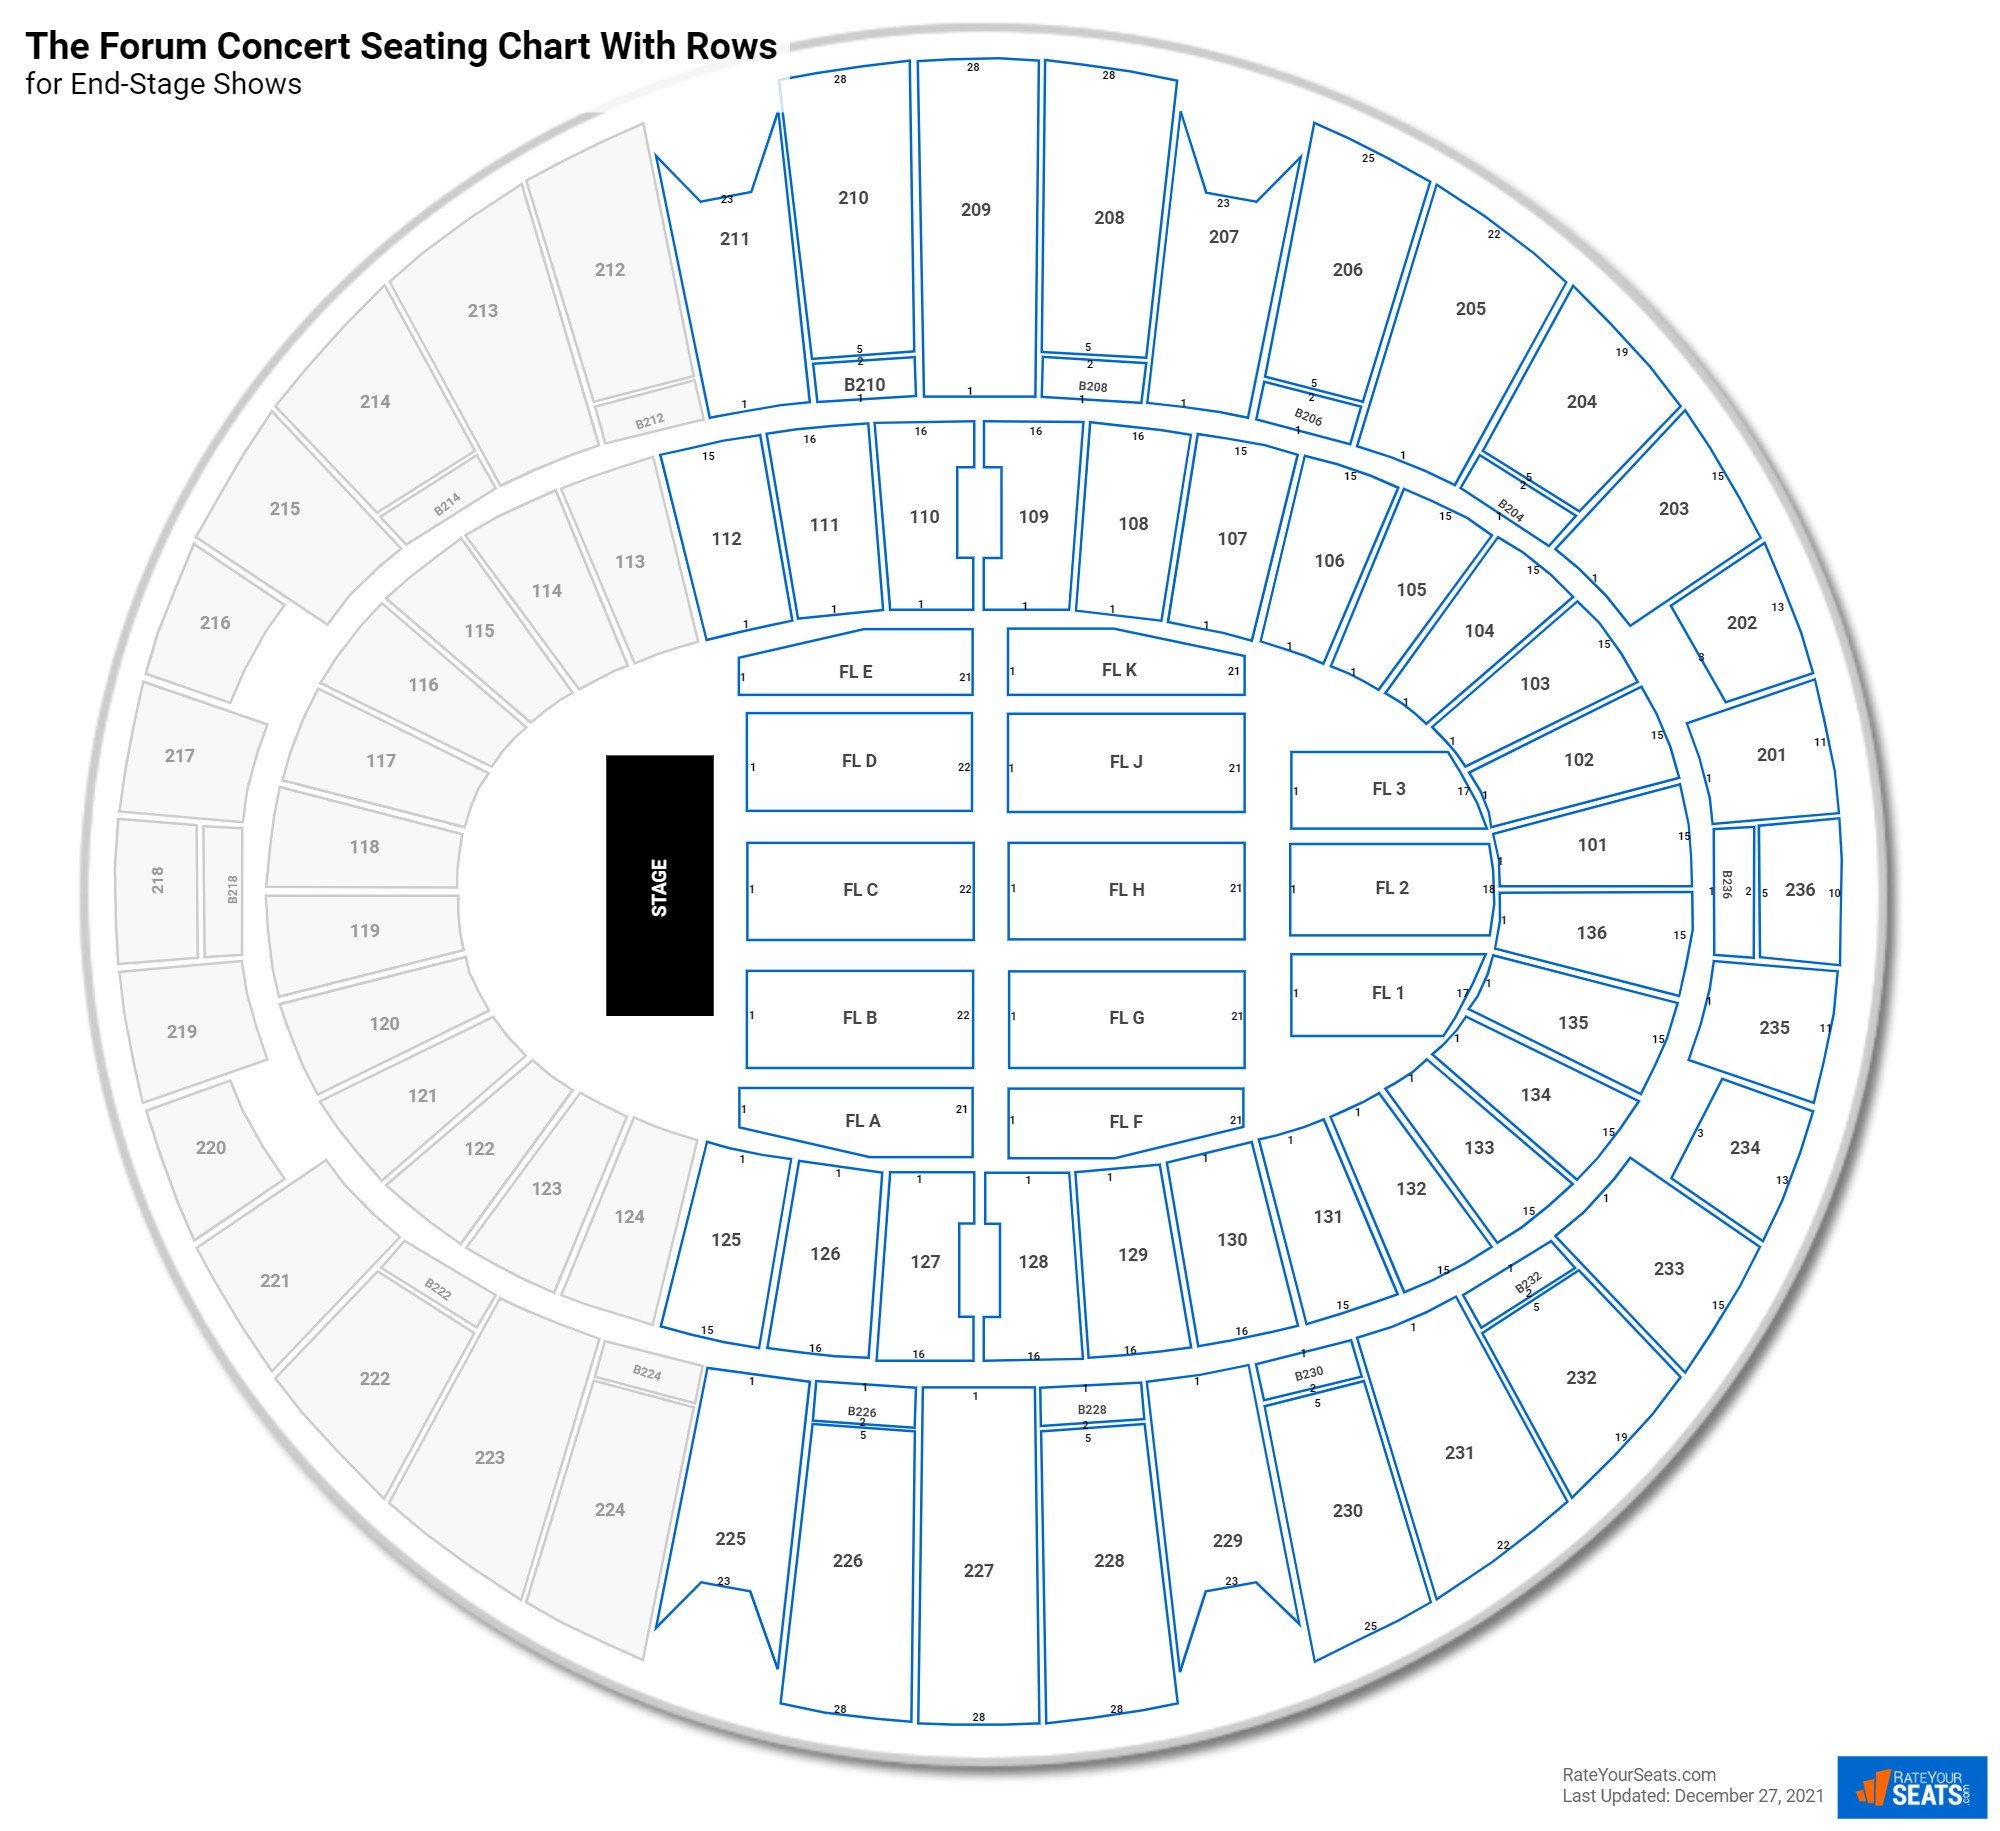 Kia Forum seating chart with row numbers